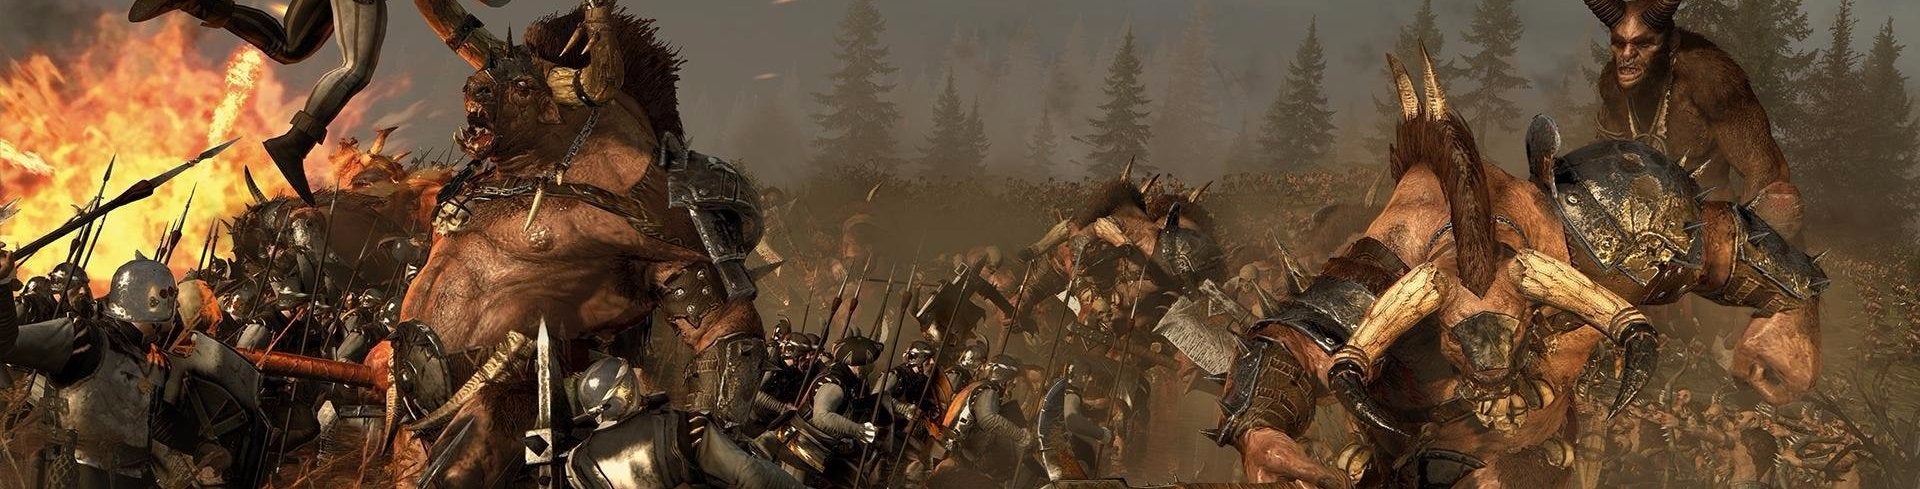 Image for Hands-on with Total War: Warhammer's newest race, the Beastmen